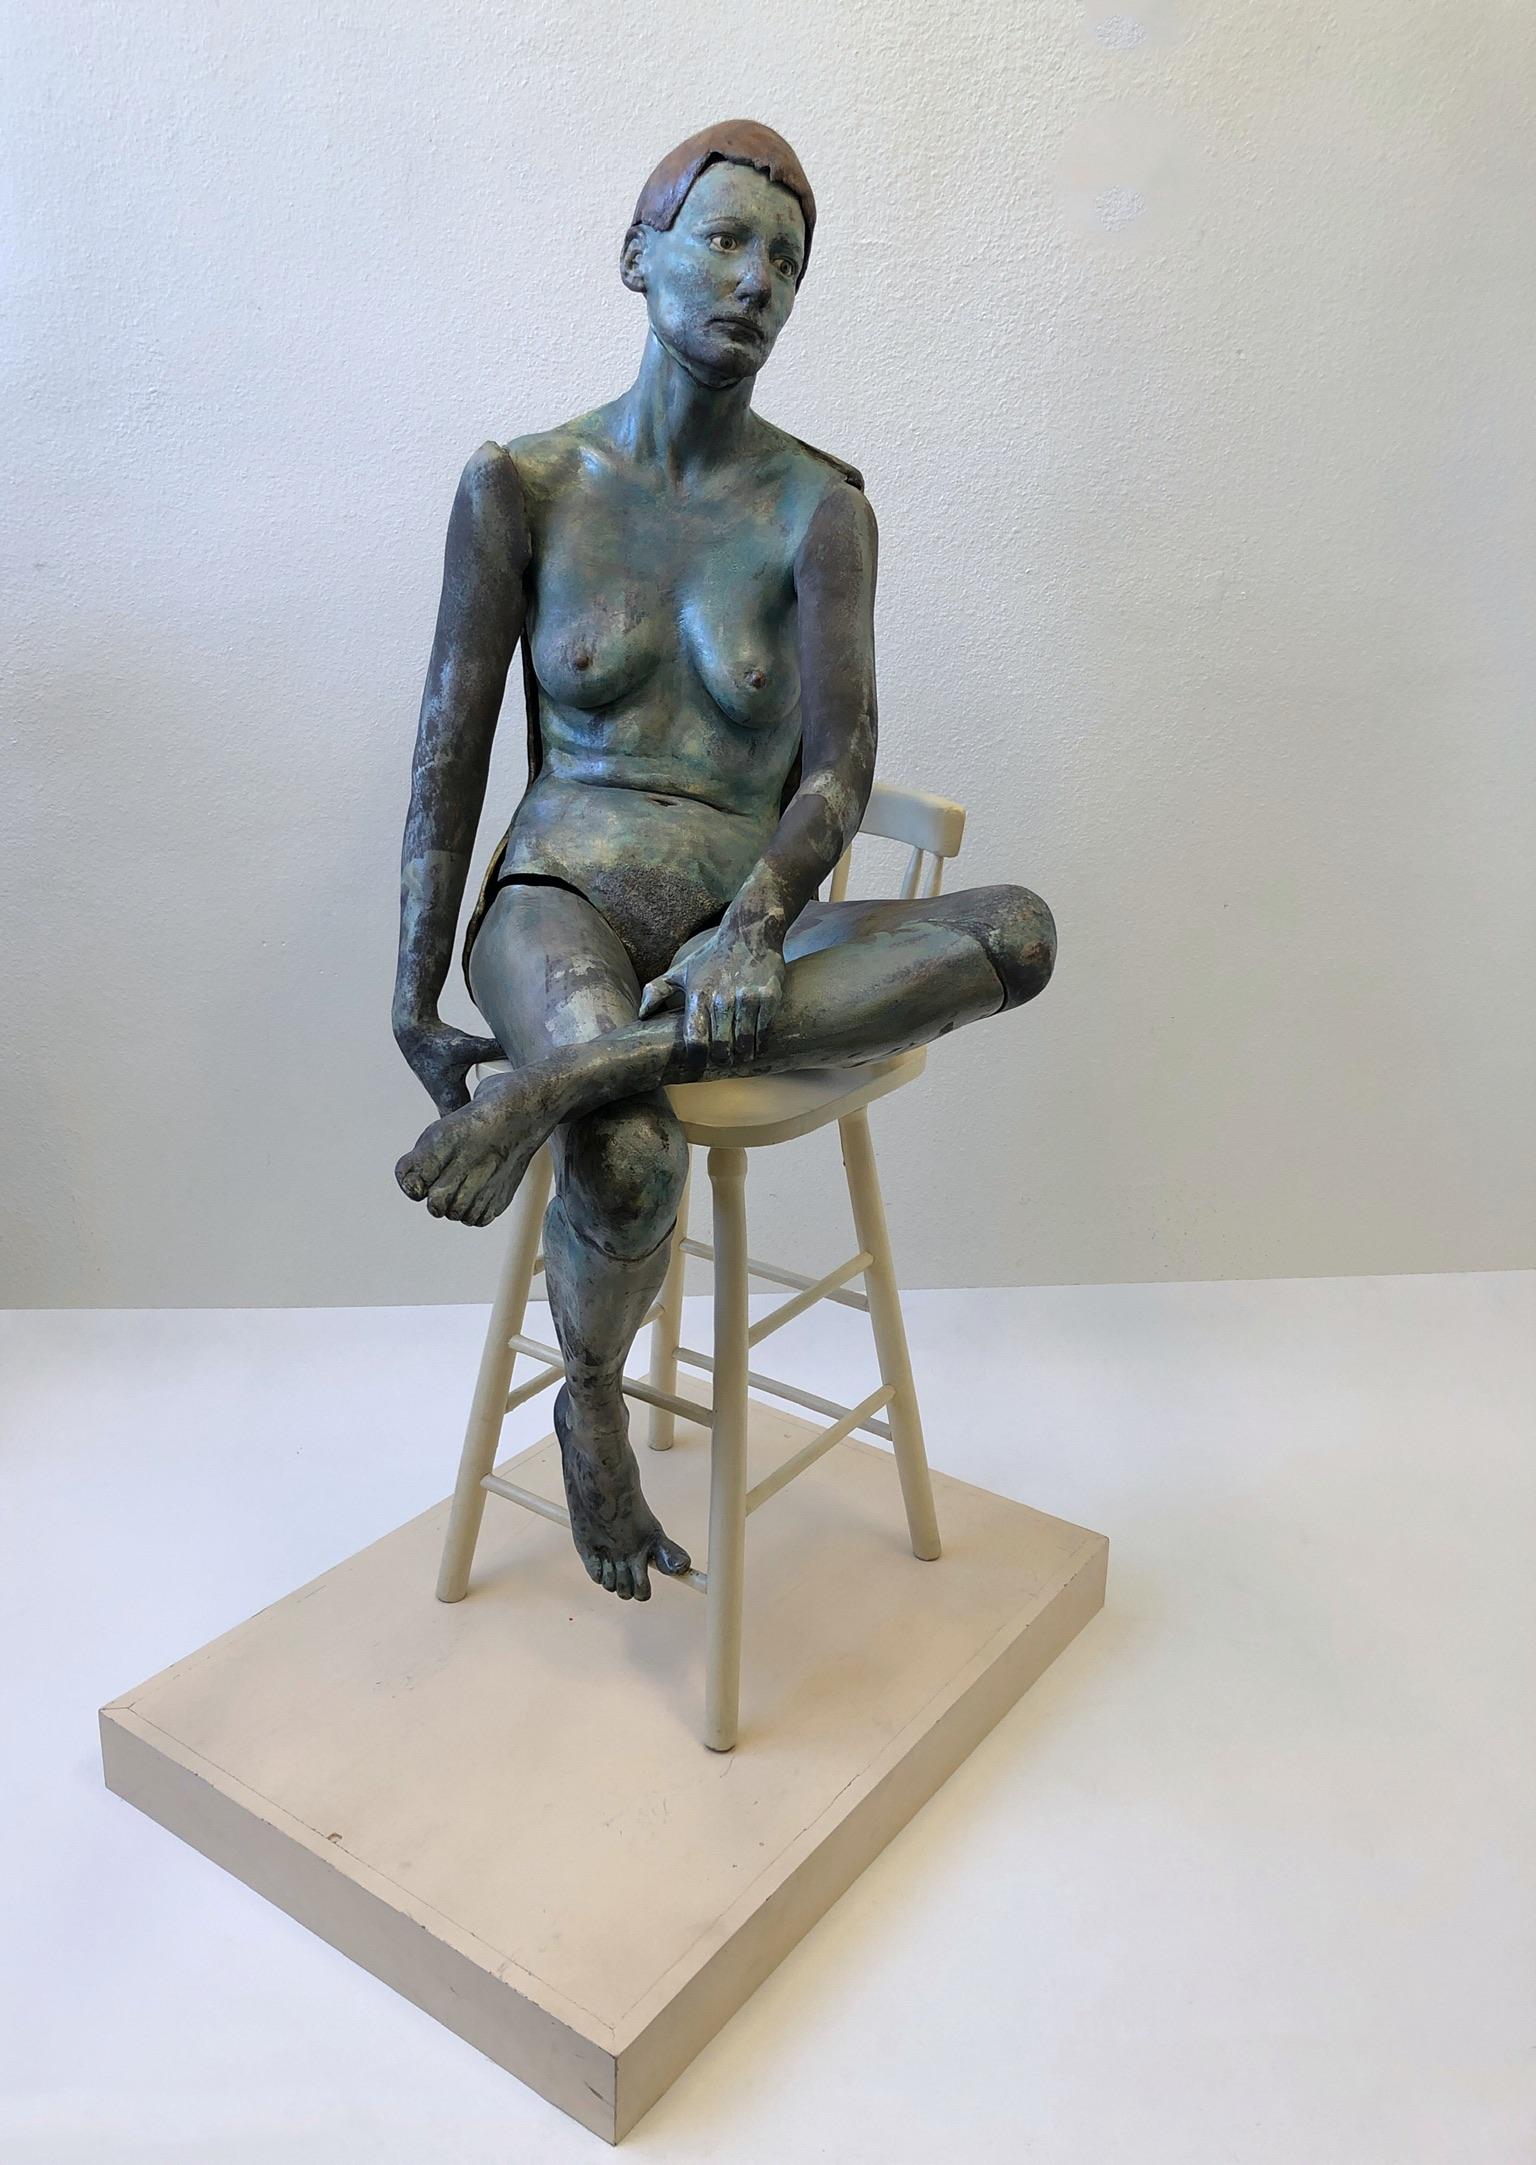 A spectacular 1980s Raku-fired ceramic female nude sculpture by Eva Stettner. The female sculpture is constructed of sections of ceramic that’s low fired glazed, the chair is painted wood. The two arms and one leg are removable.
Measurements- 57”